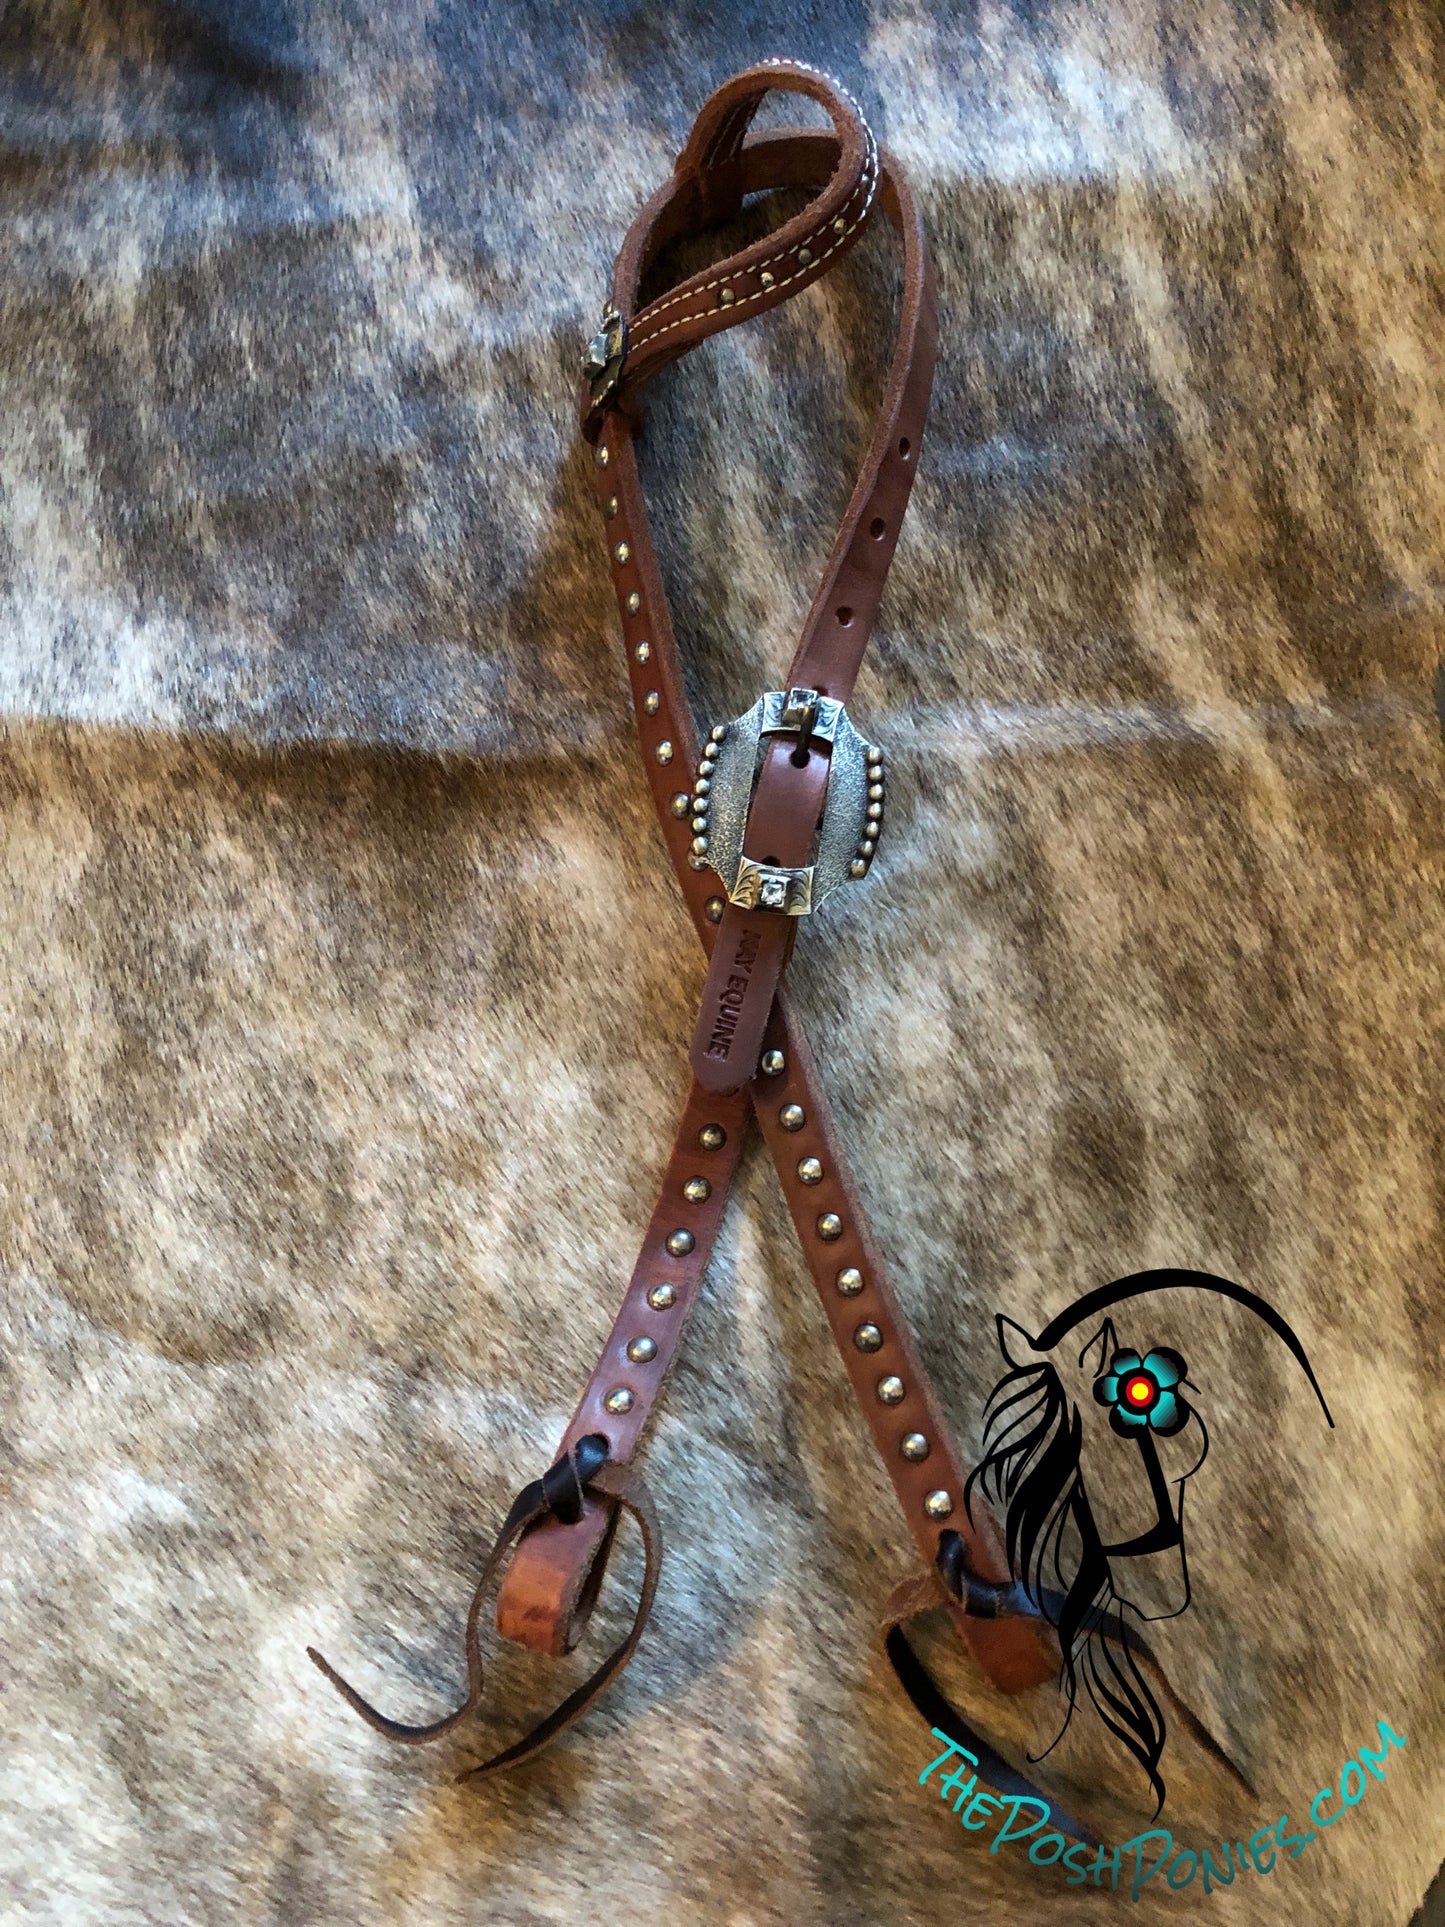 Handmade Medium Oil Simple Headstall with Handmade Hardware Nickel with Clear Stone Silver Spots